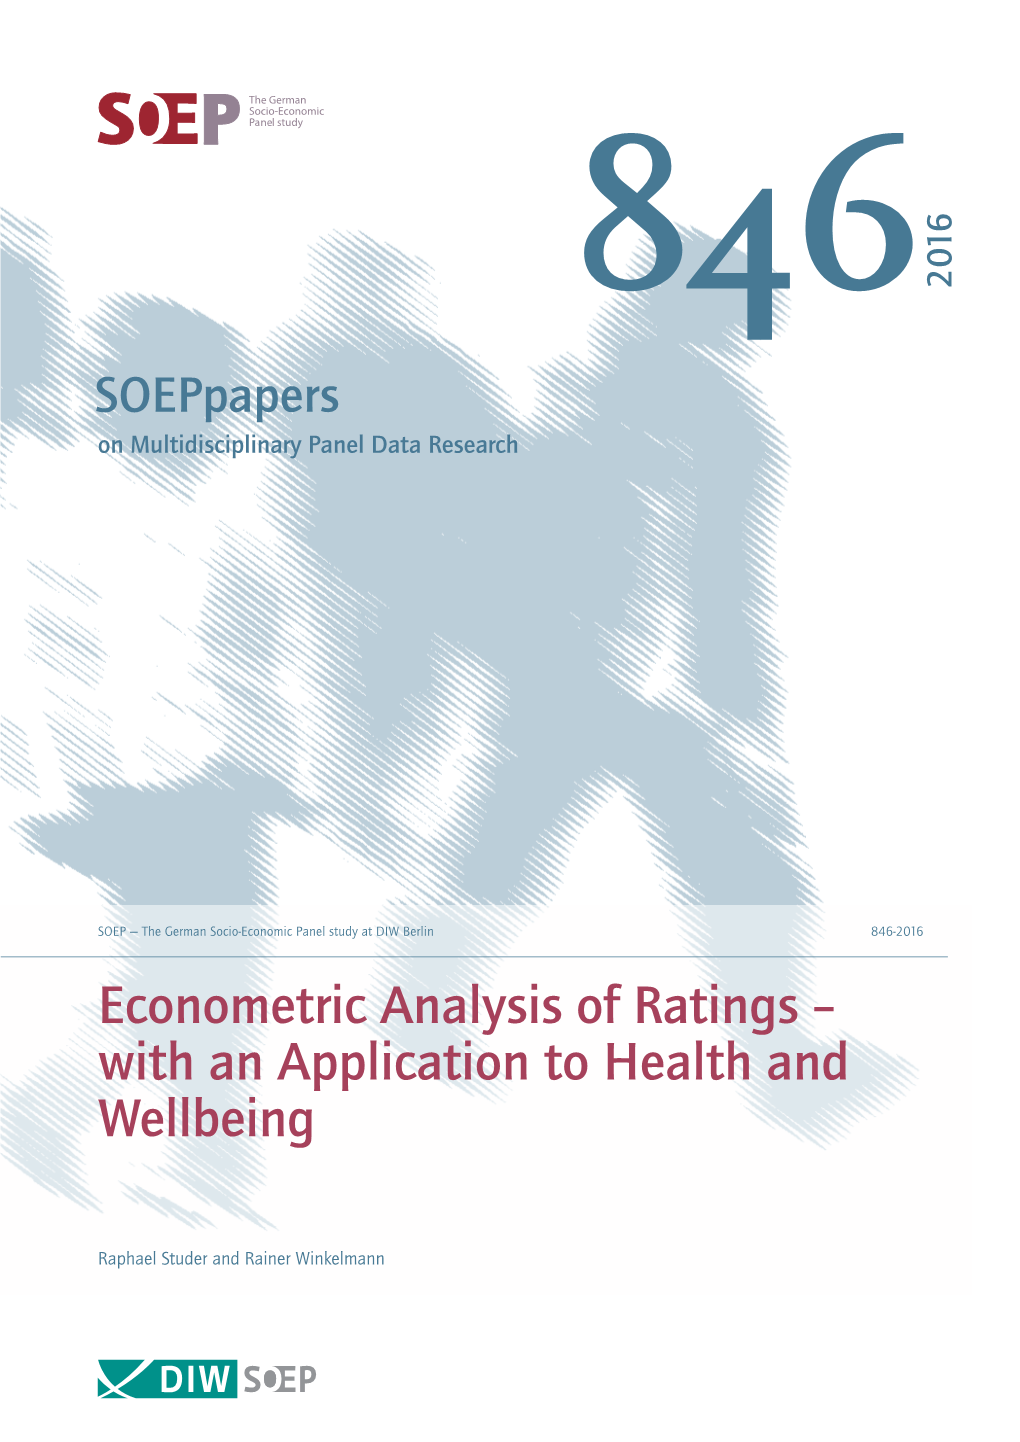 Econometric Analysis of Ratings – with an Application to Health and Wellbeing